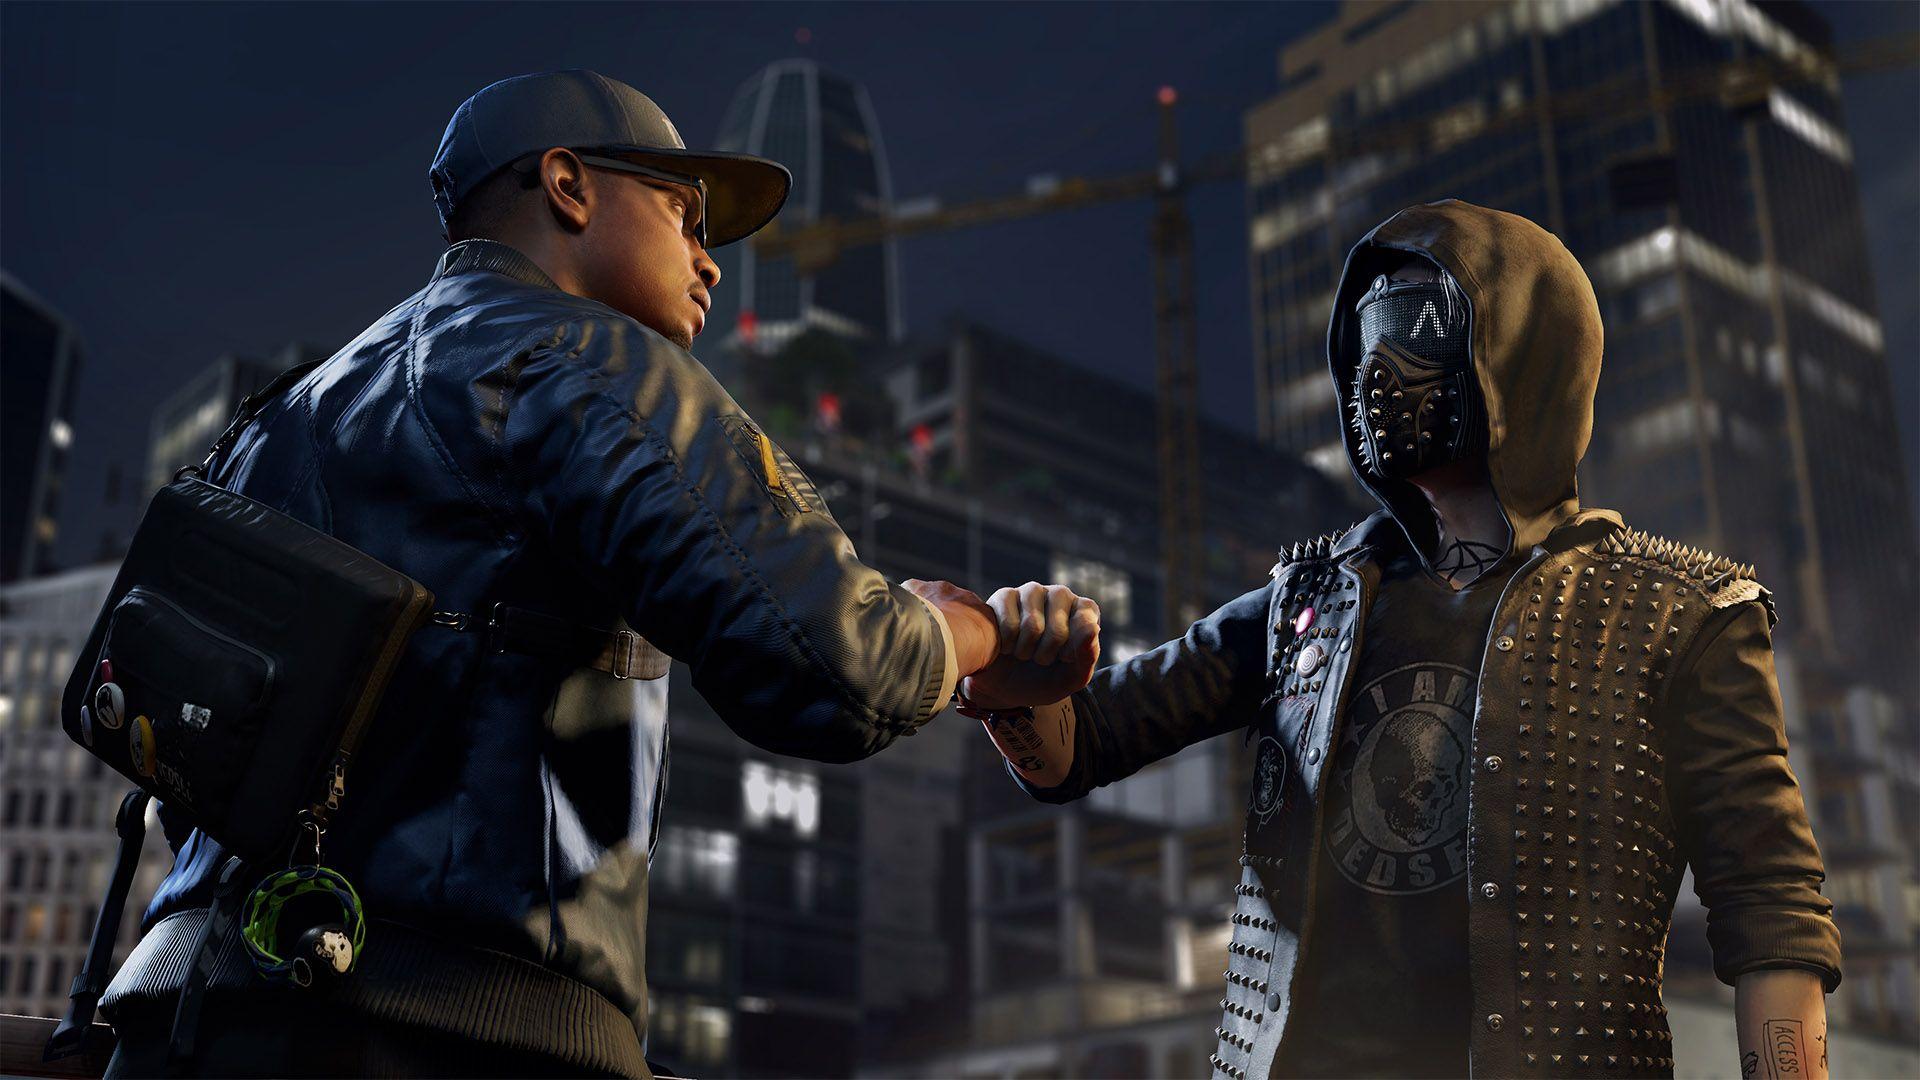 DedSec Watch Dogs 2 Wrench Sitara and Josh Wallpaper. Watch Dogs